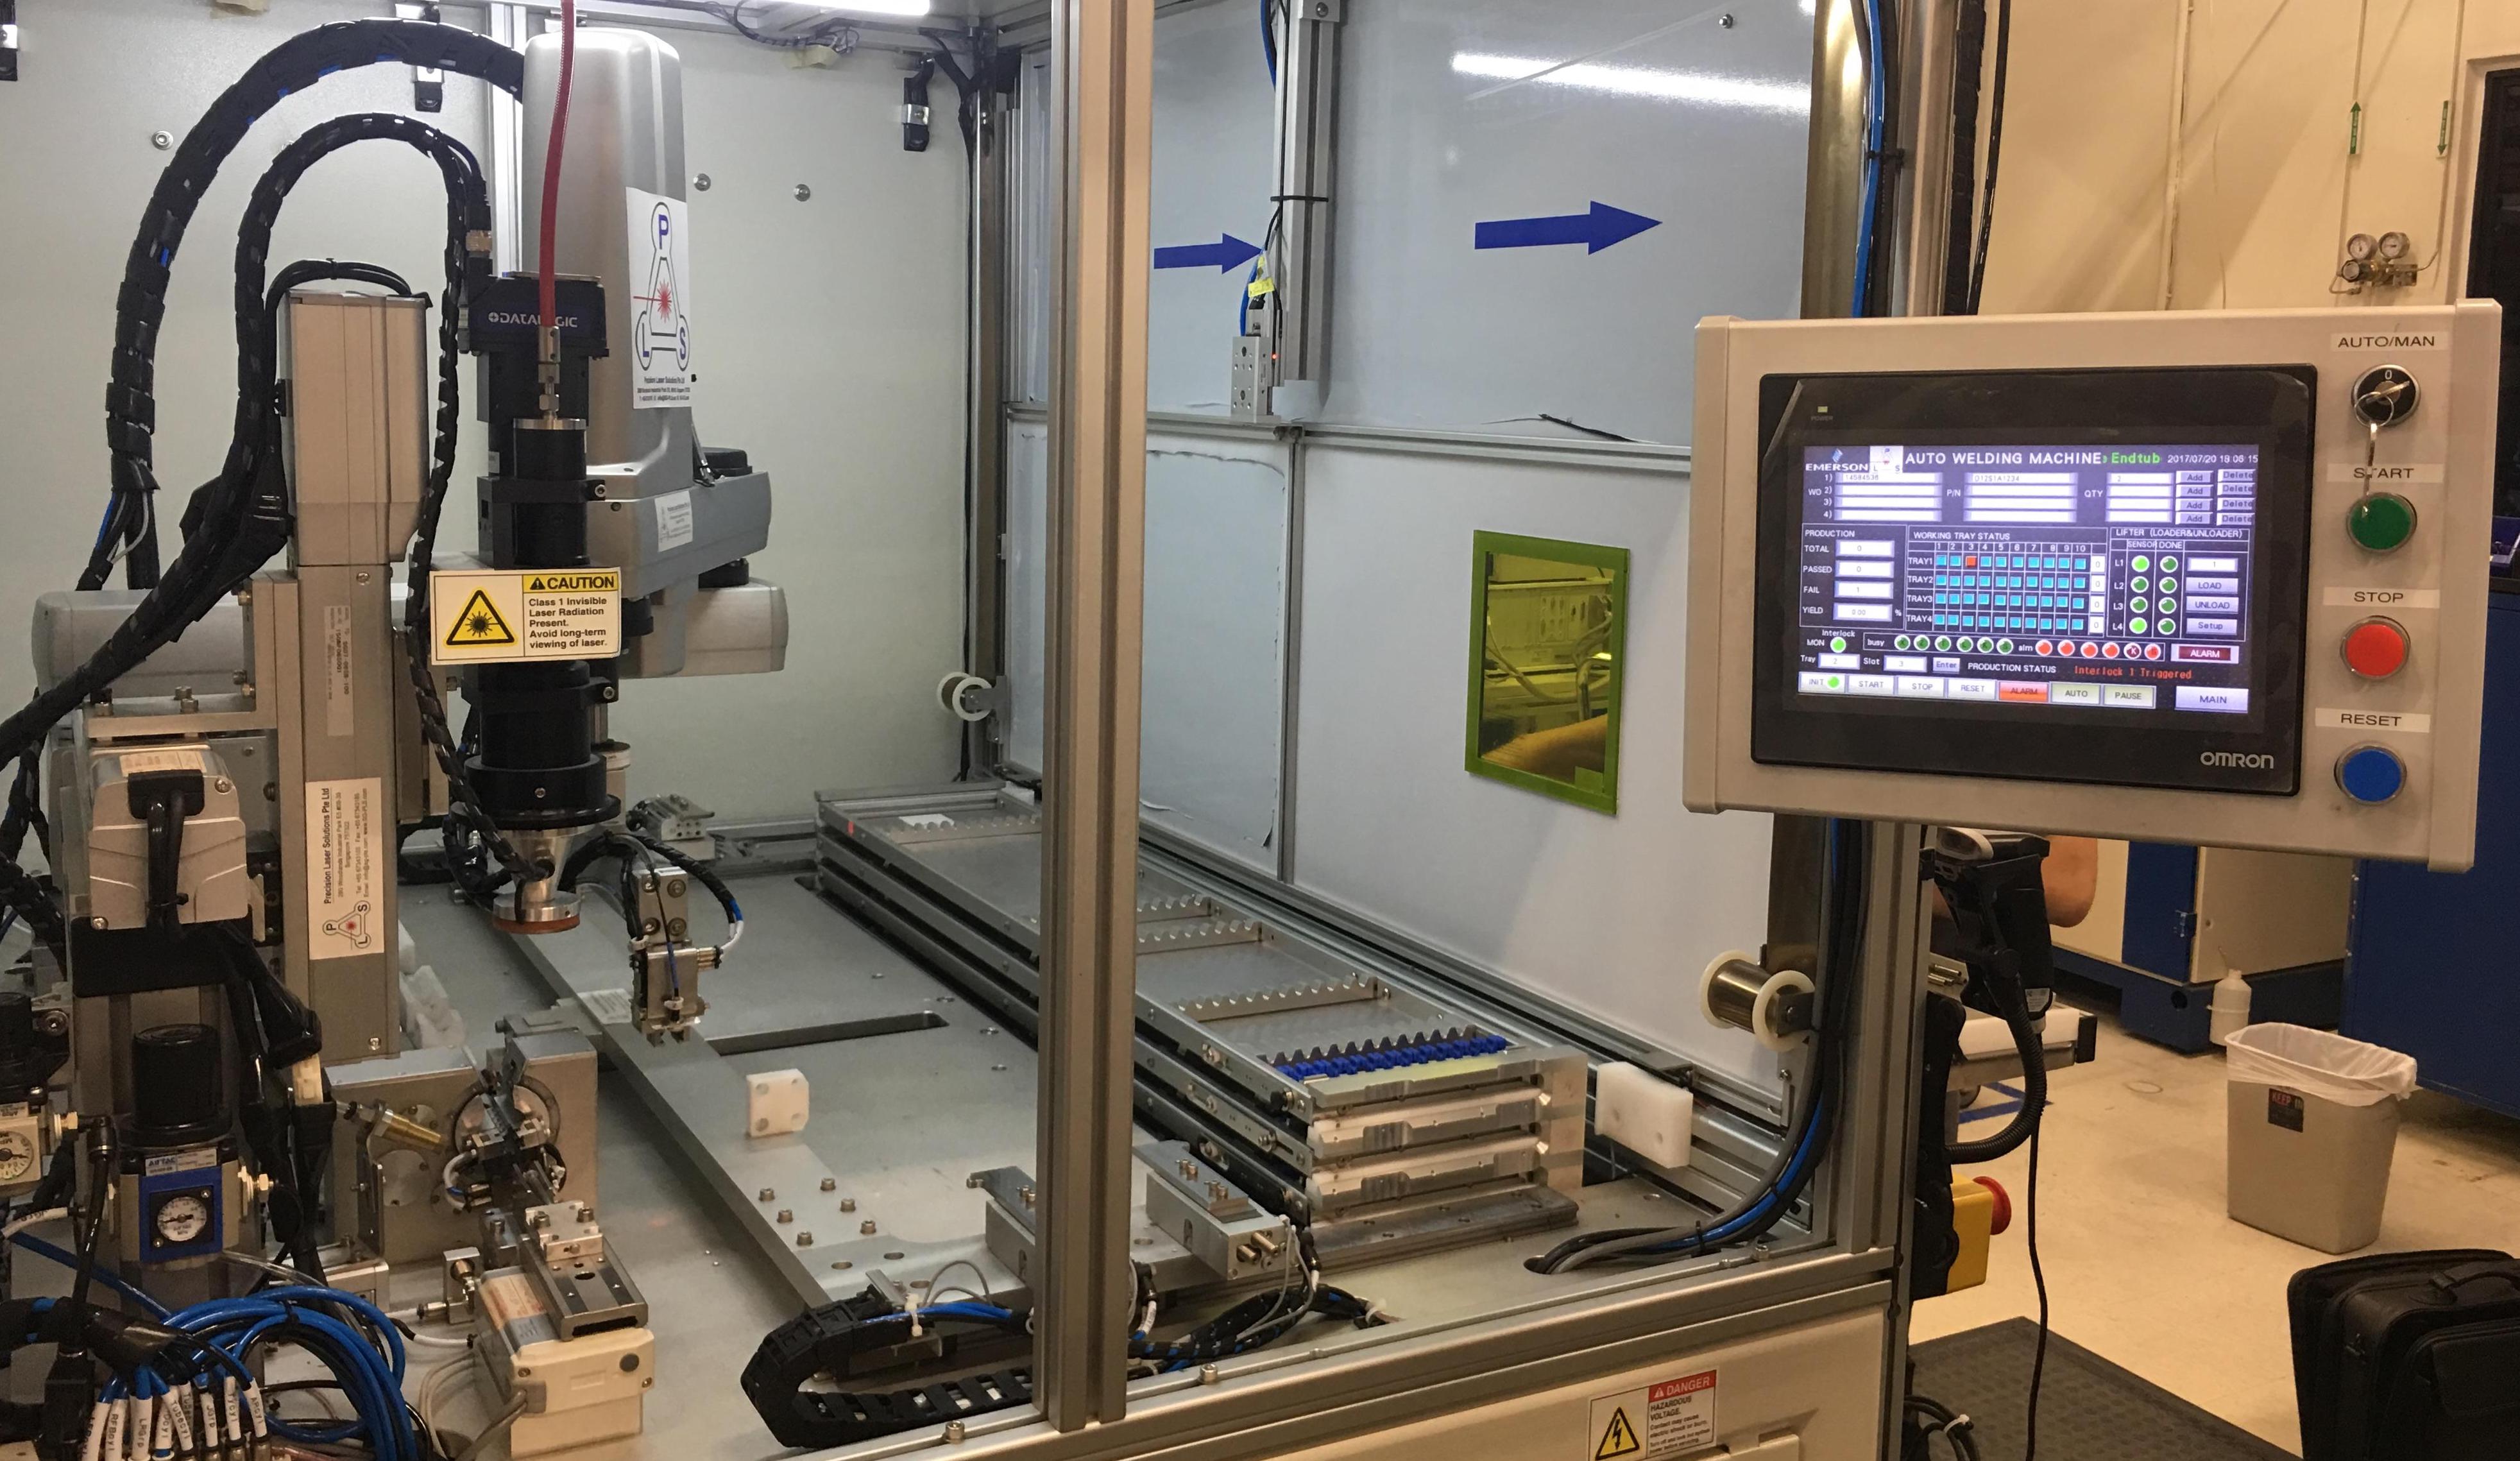 NAMIC's facilities include fully automated precision micro-welding with pulsed lasers (pictured). Photo via NAMIC.